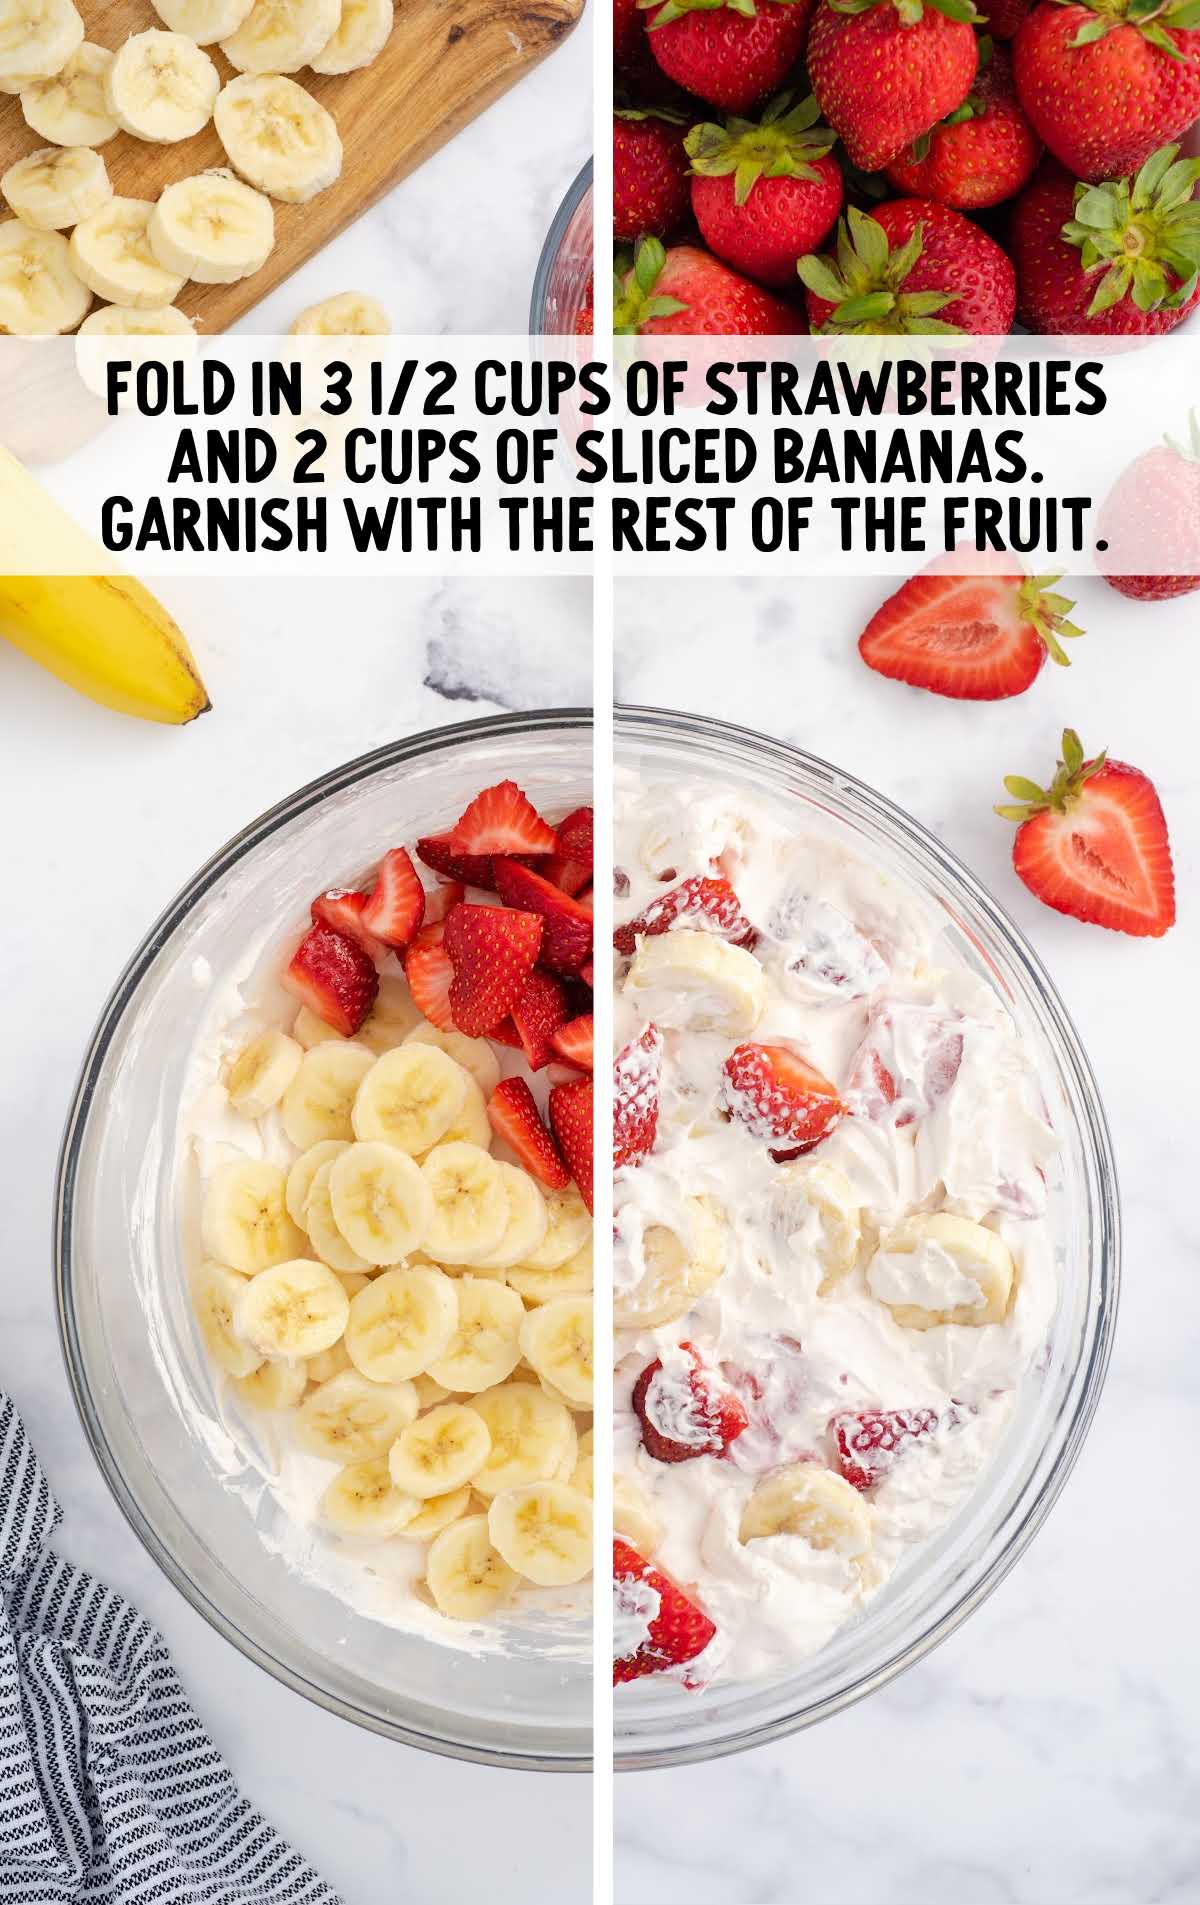 strawberries and bananas added to the yogurt in a bowl